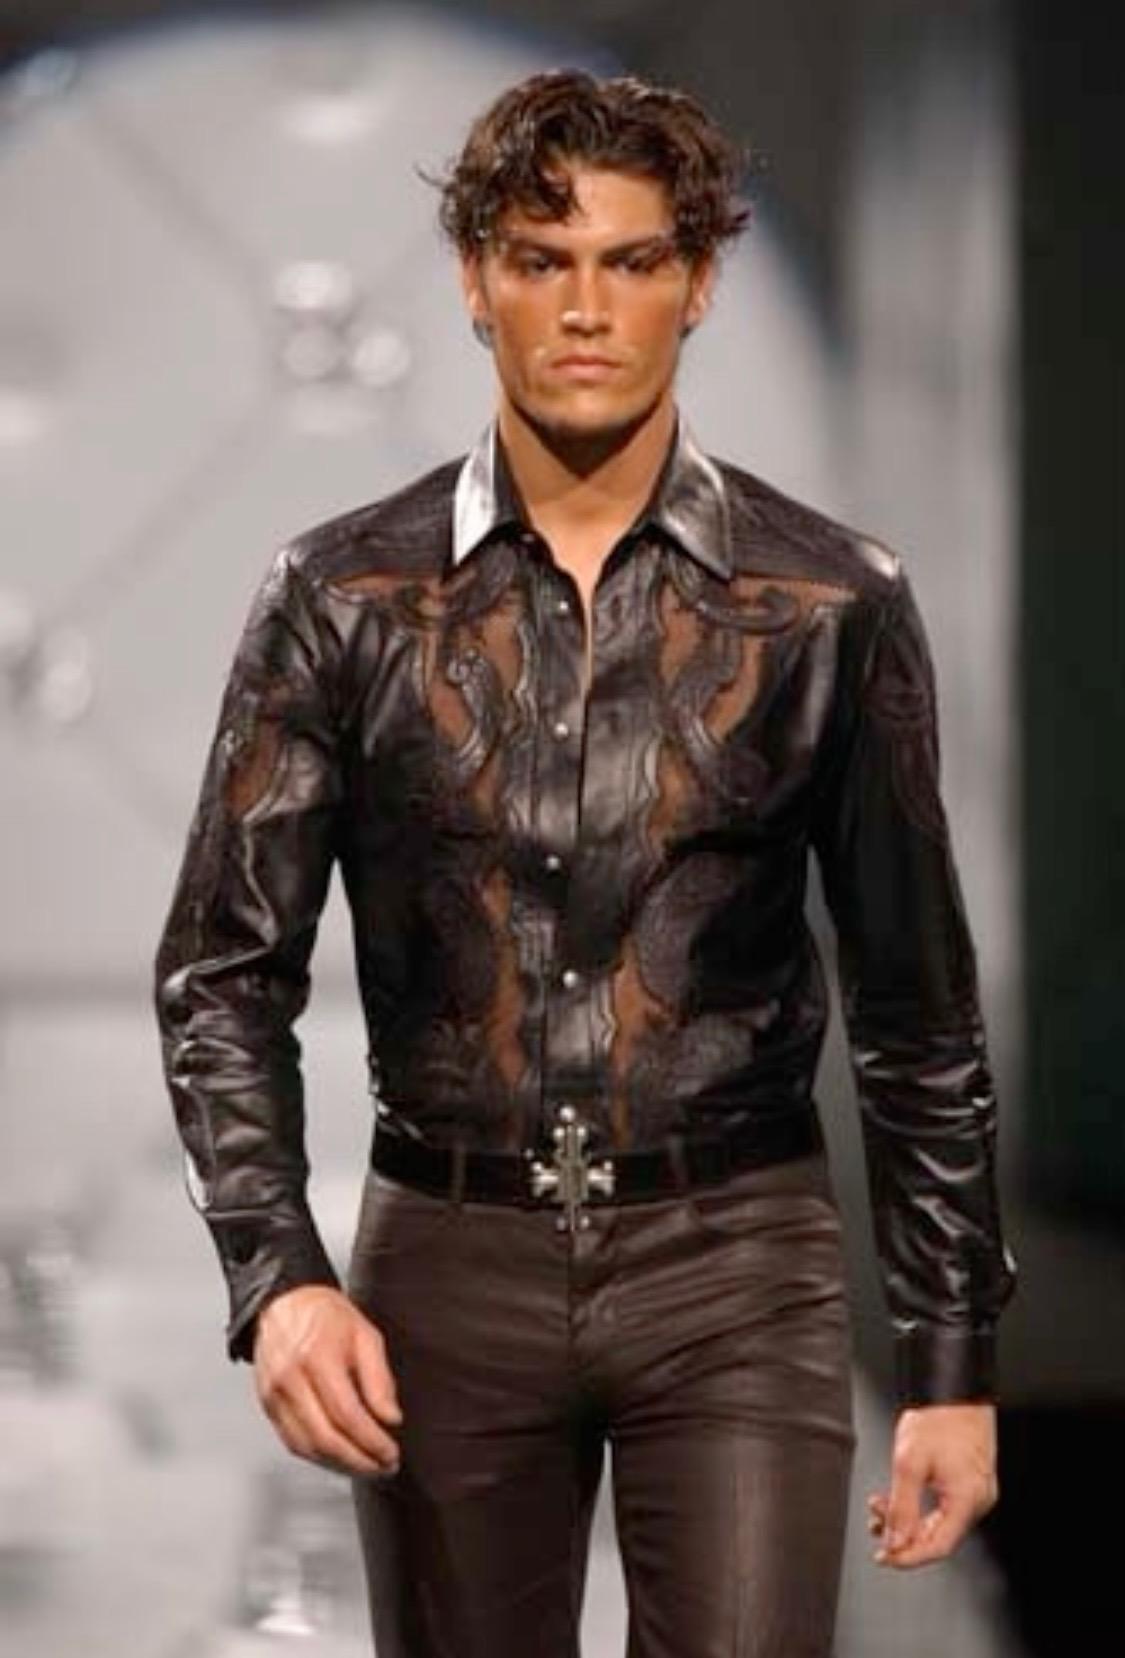 Presenting an embroidered cutout leather button-up shirt designed by Donatella for the Spring/Summer 2003 Gianni Versace Menswear runway. This rock-n-roll-inspired shirt features floral mesh embroidery and 'DV' monogram logo buttons down the center